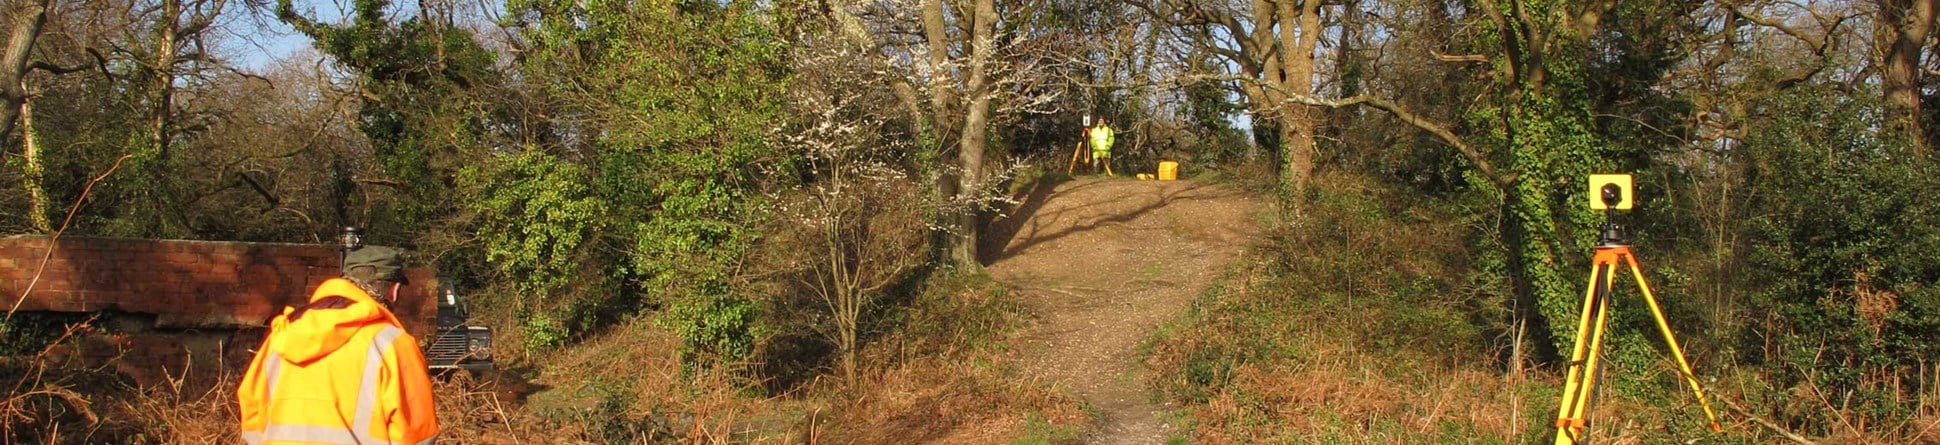 Two archaeologists in hi-vis gear surveying a small motte and bailey castle.